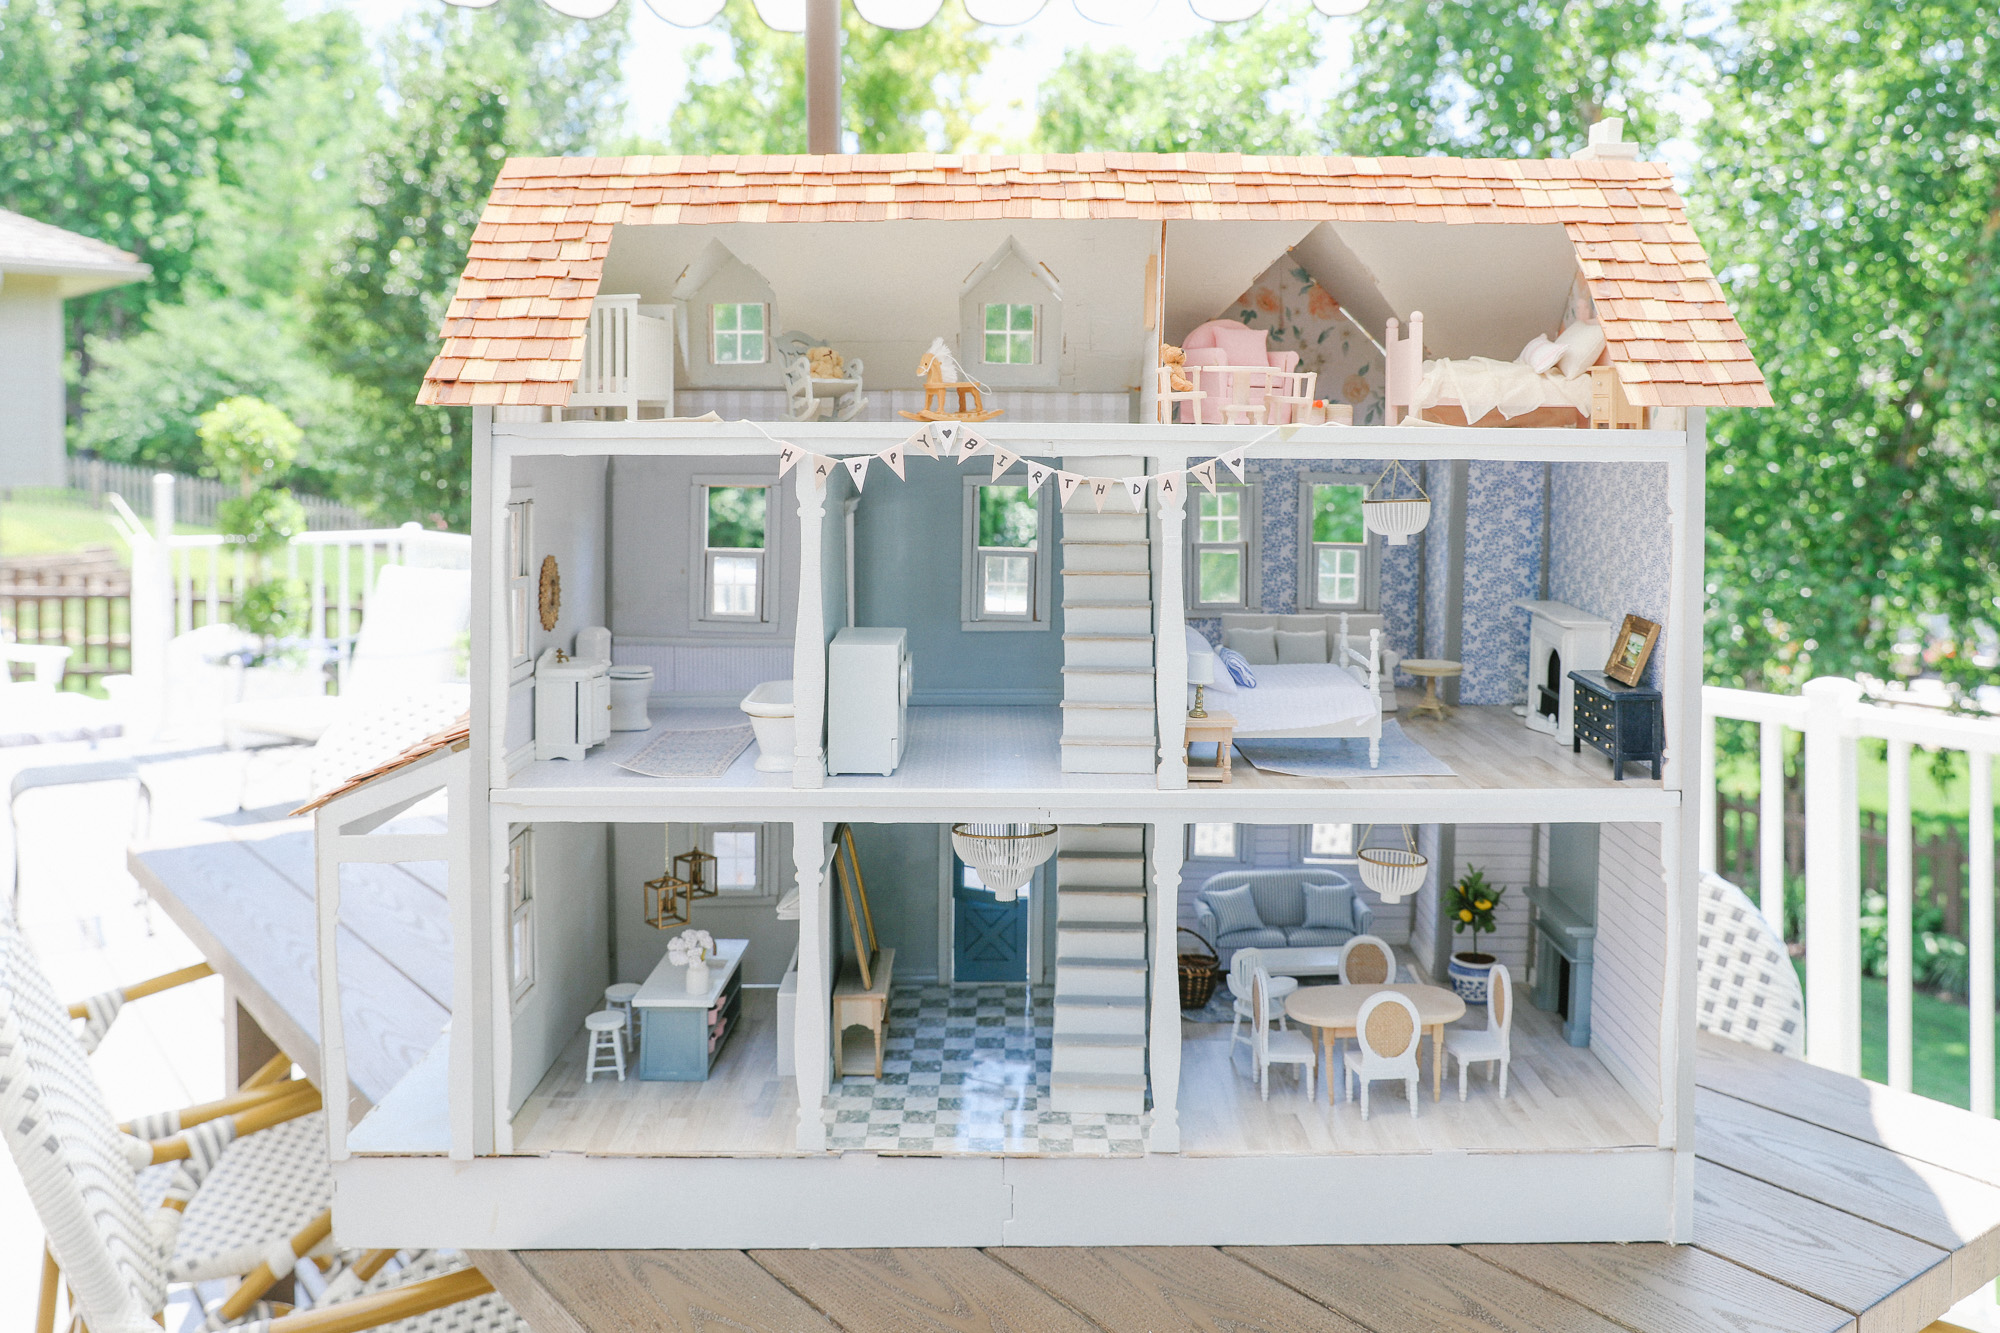 How To Make Modern Paper Dollhouse with Paper Items Online